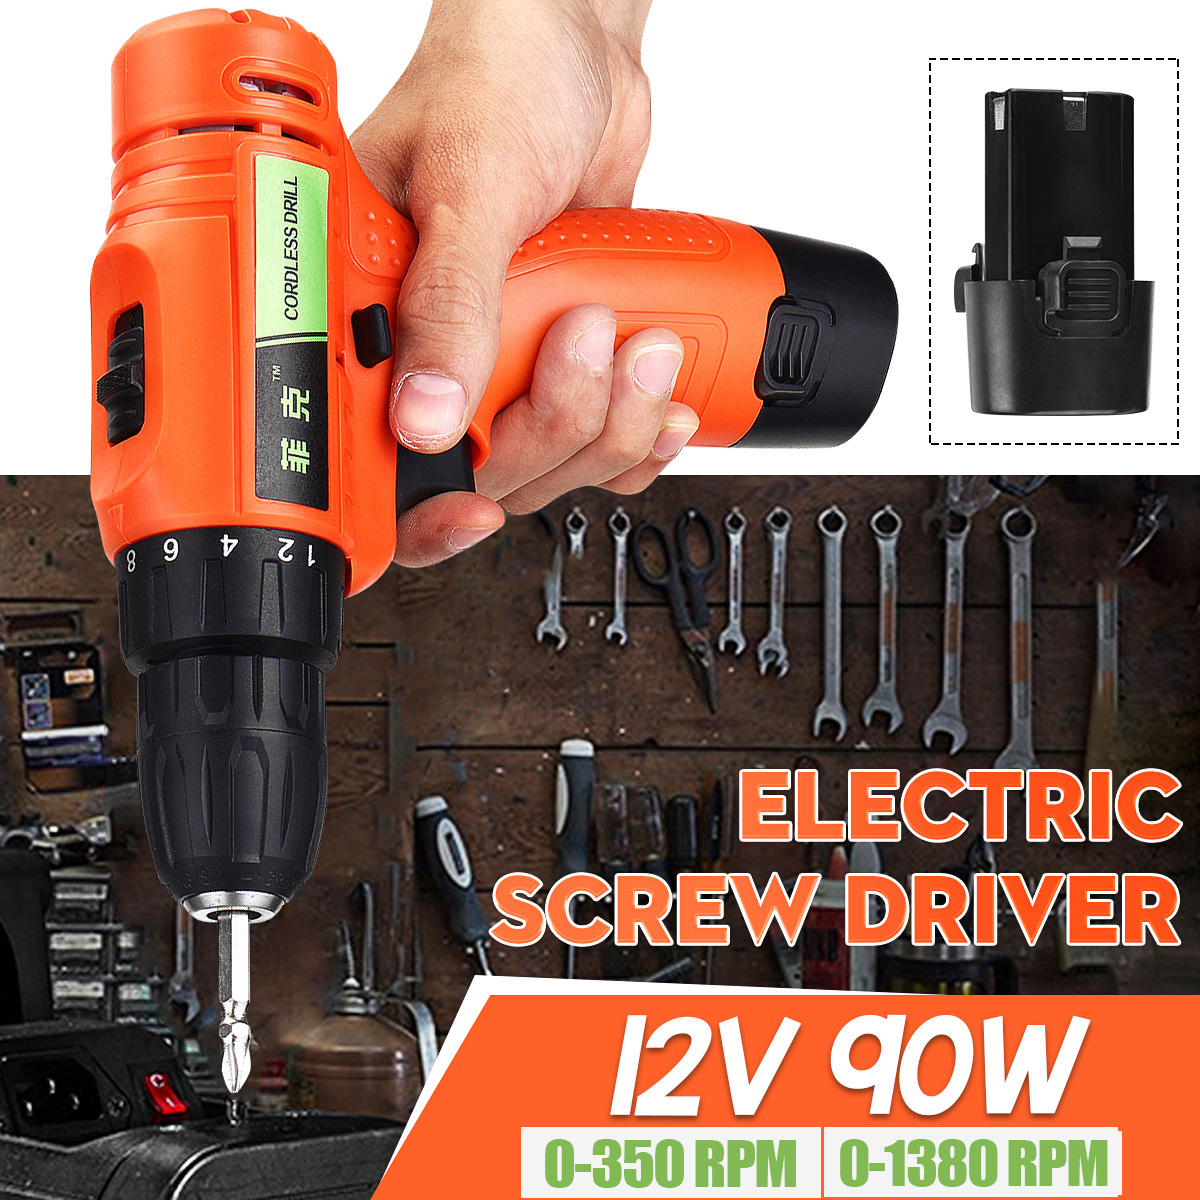 Dual-Speed-Rechargable-Electric-Scredriver-Drill-Mini-Power-Drill-Screw-Driver-Li-ion-Battery-Househ-1659814-1